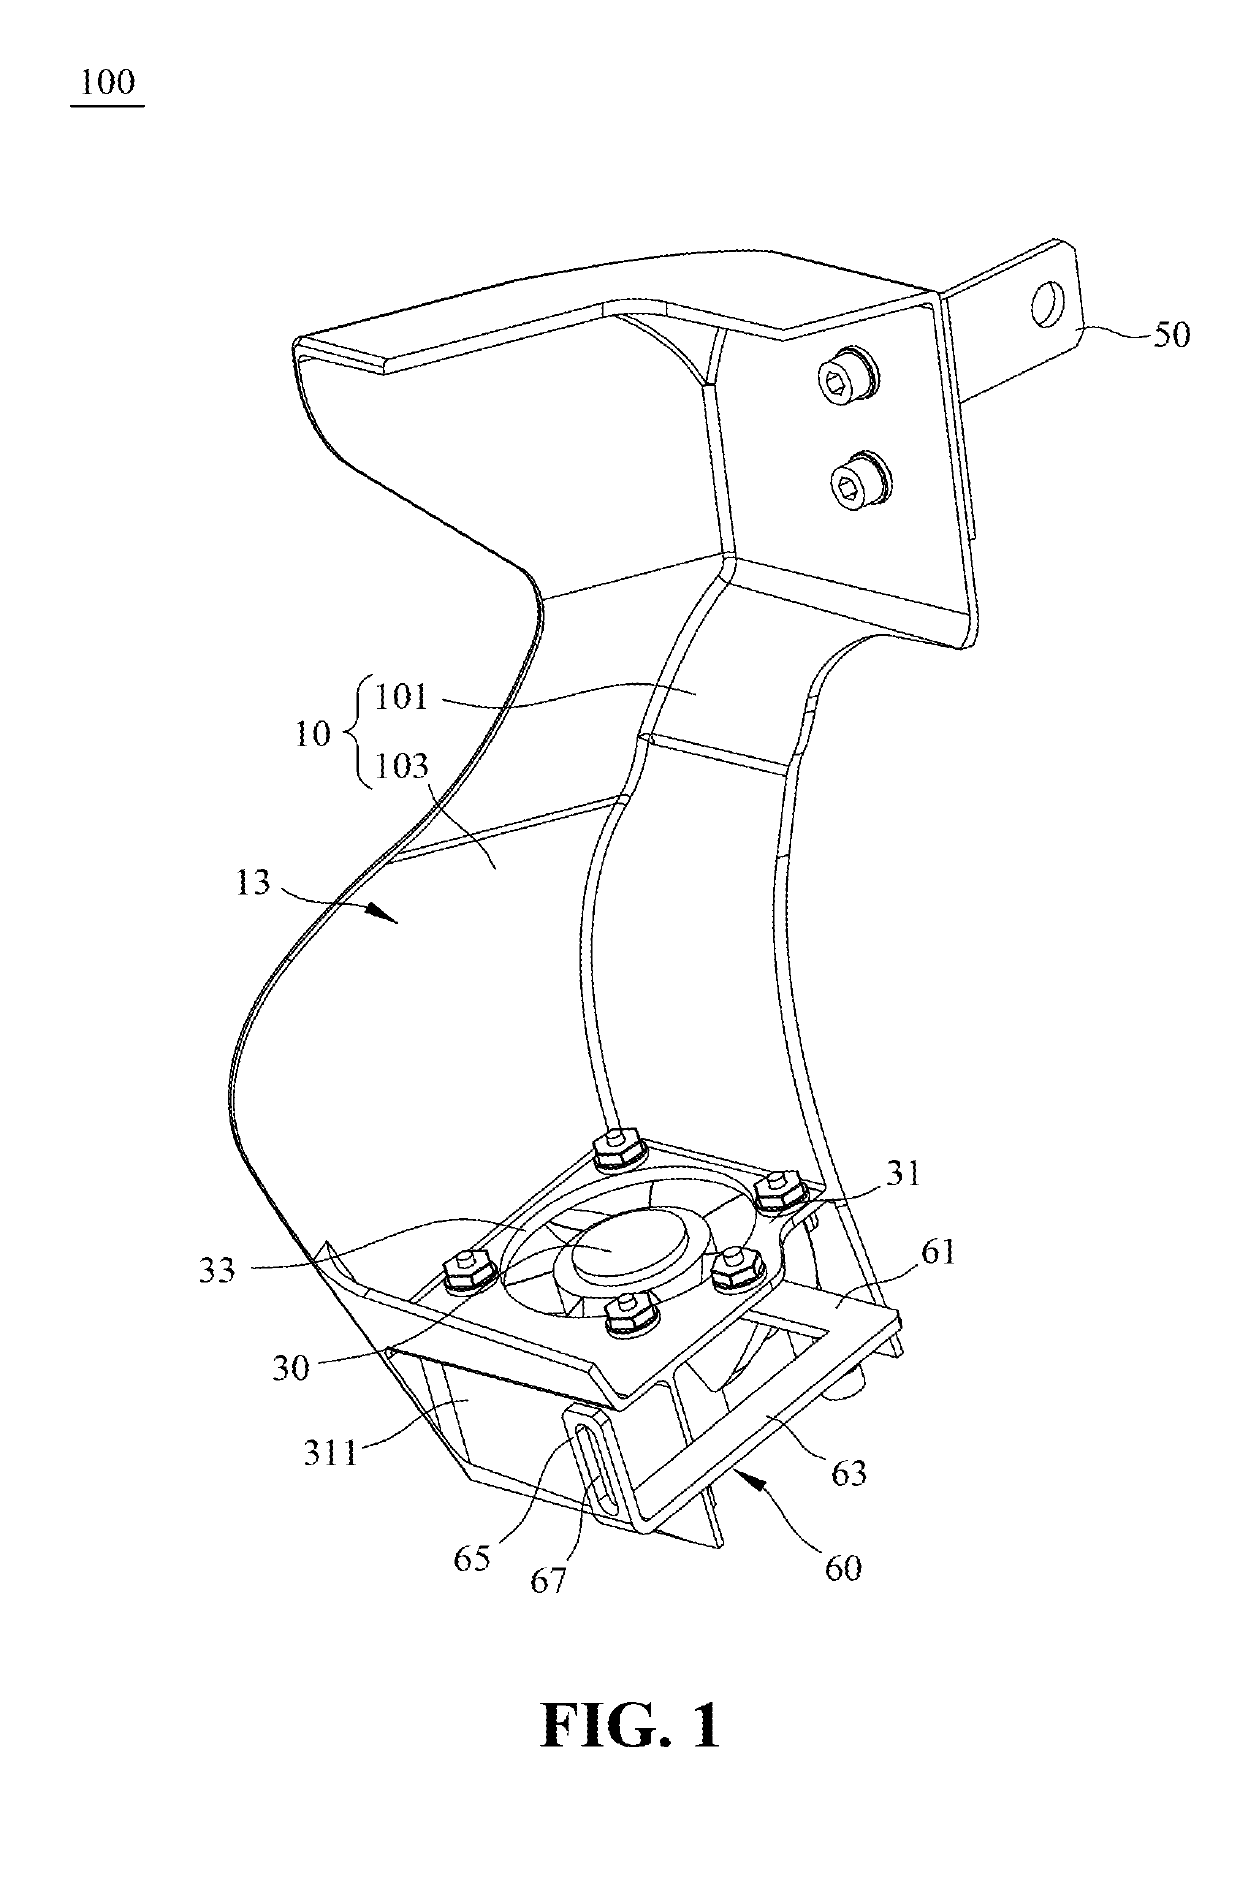 Heat dissipation device for an engine of a motorcycle